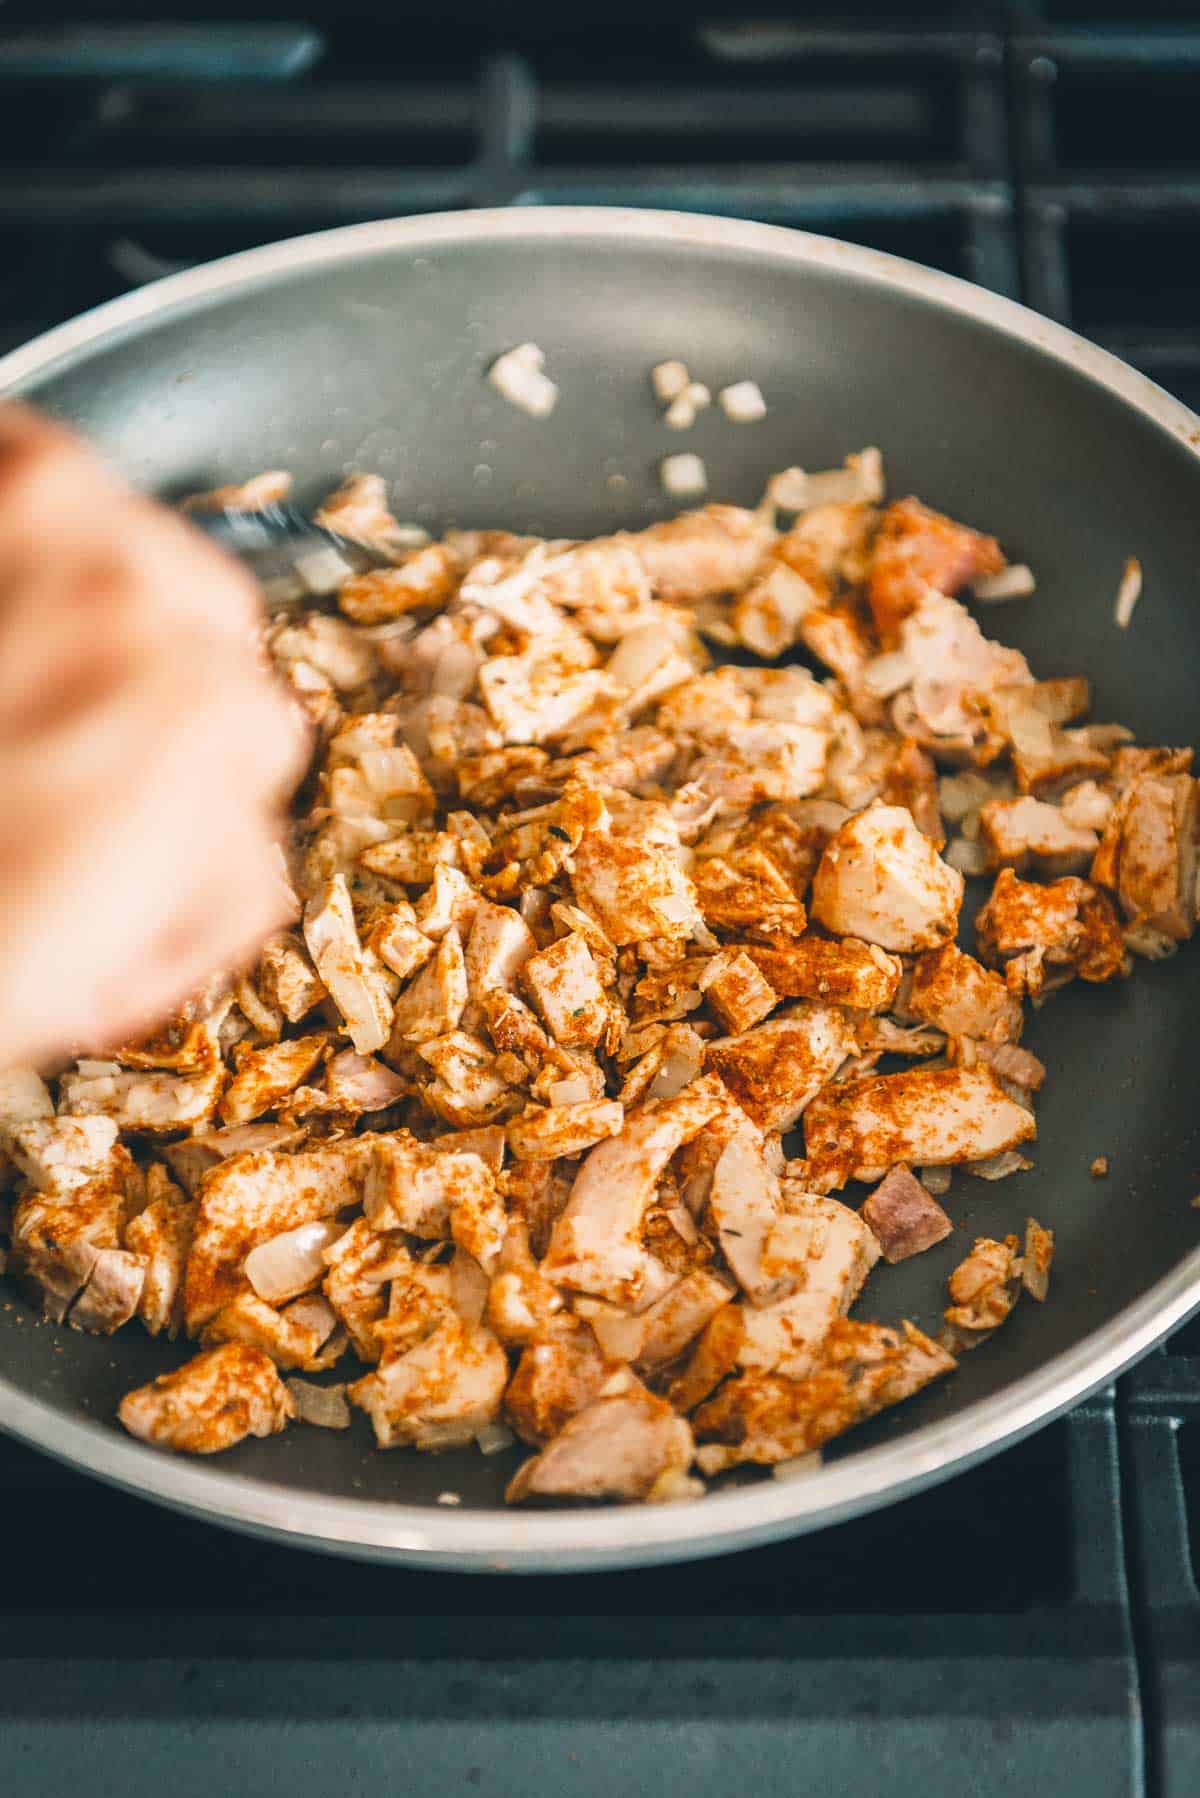 A person is cooking leftover turkey in a frying pan.